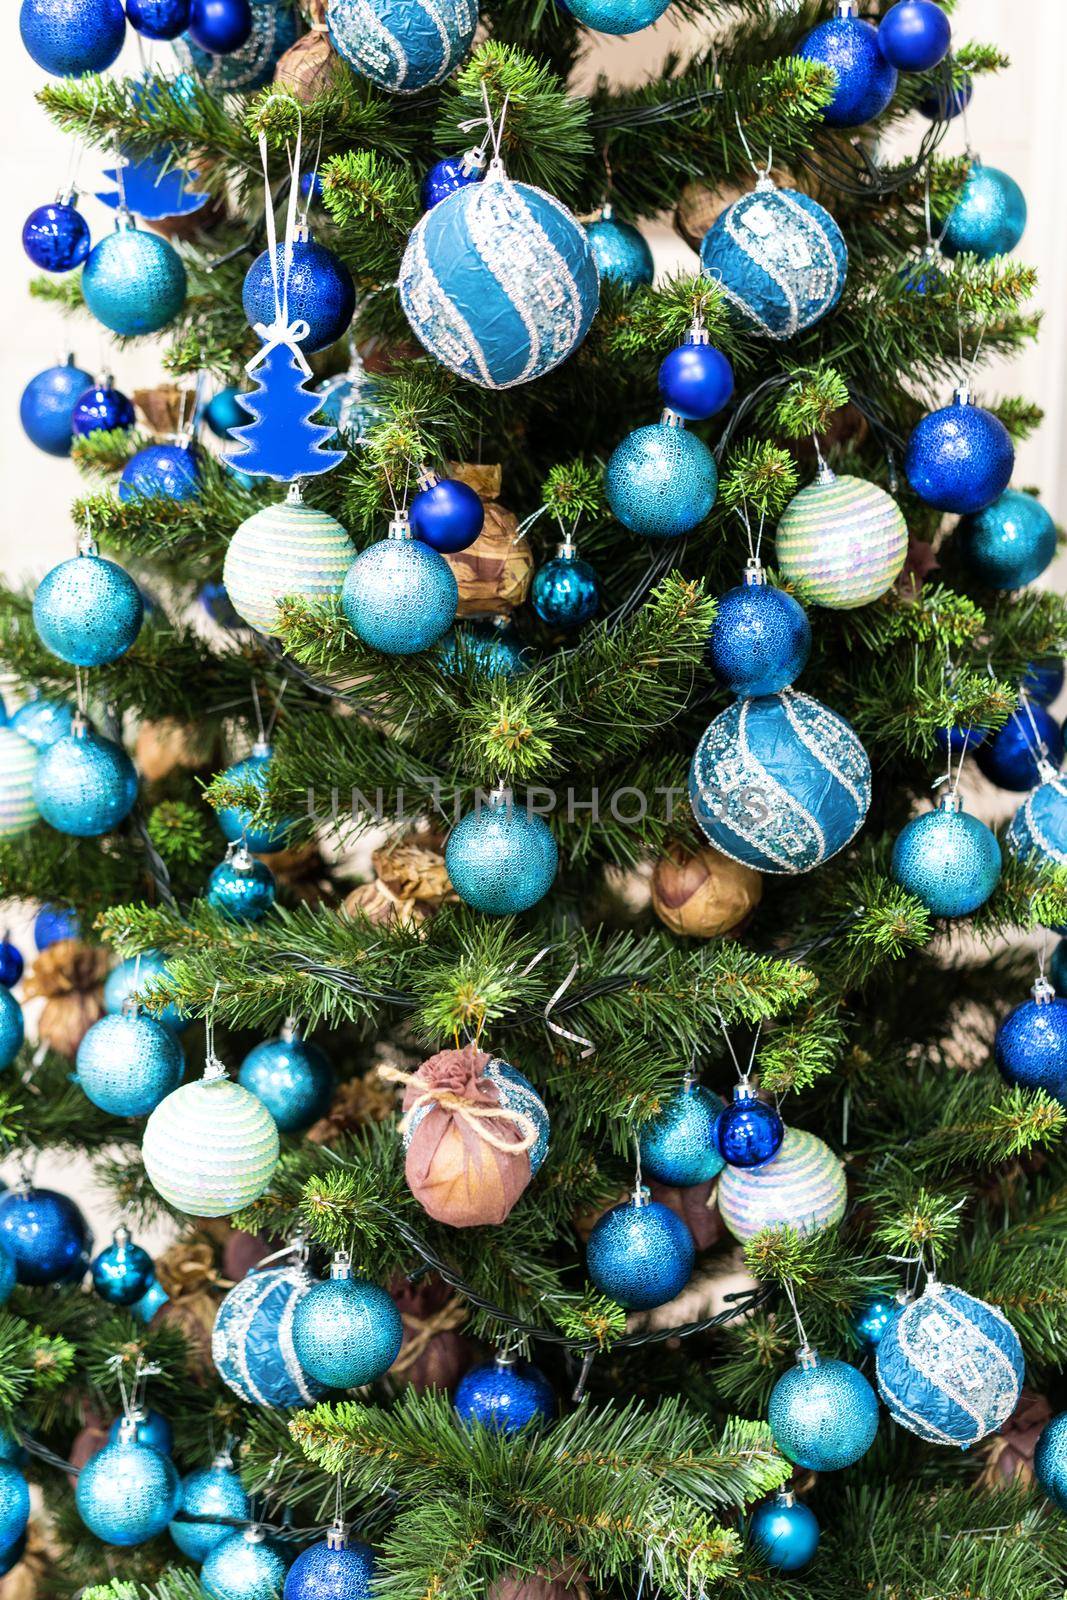 Green Christmas Tree With Beautiful White and Blue Decorations. by LipikStockMedia